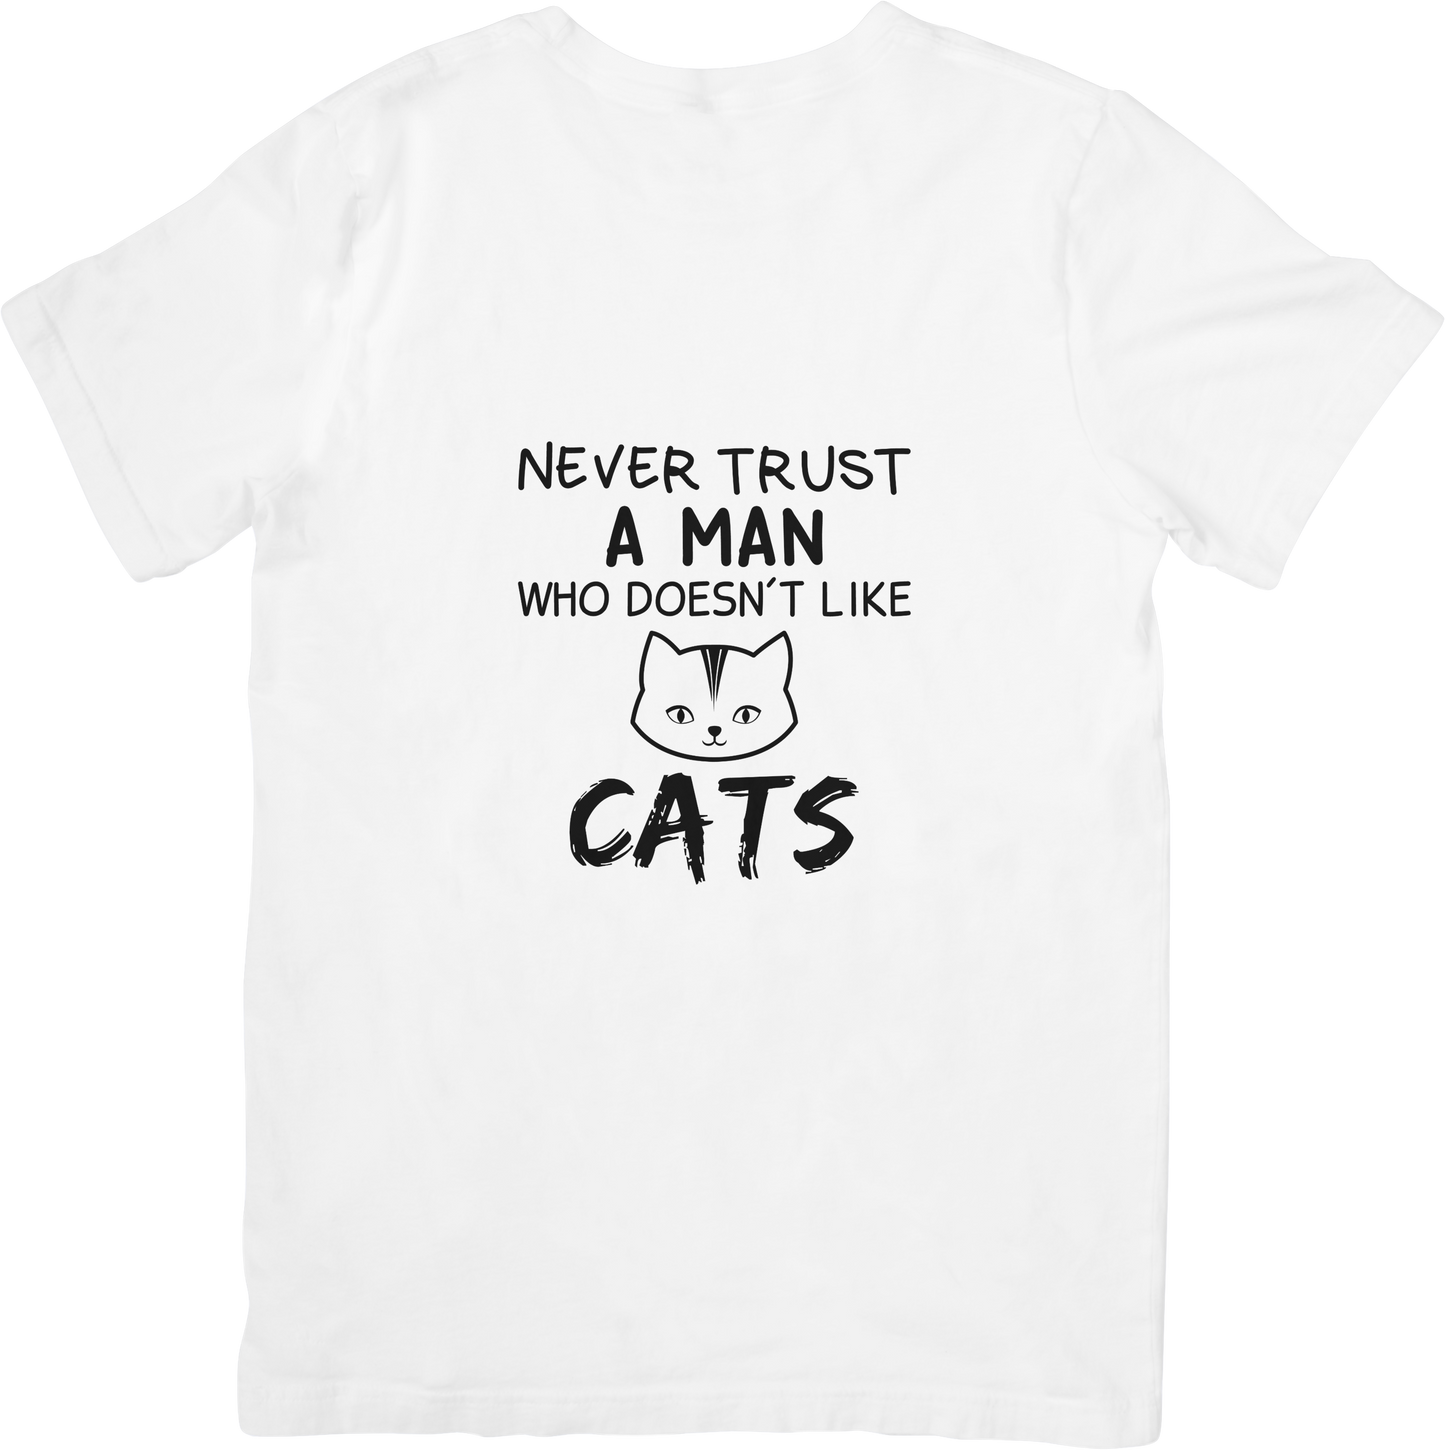 Never trust a man who does not like cats!